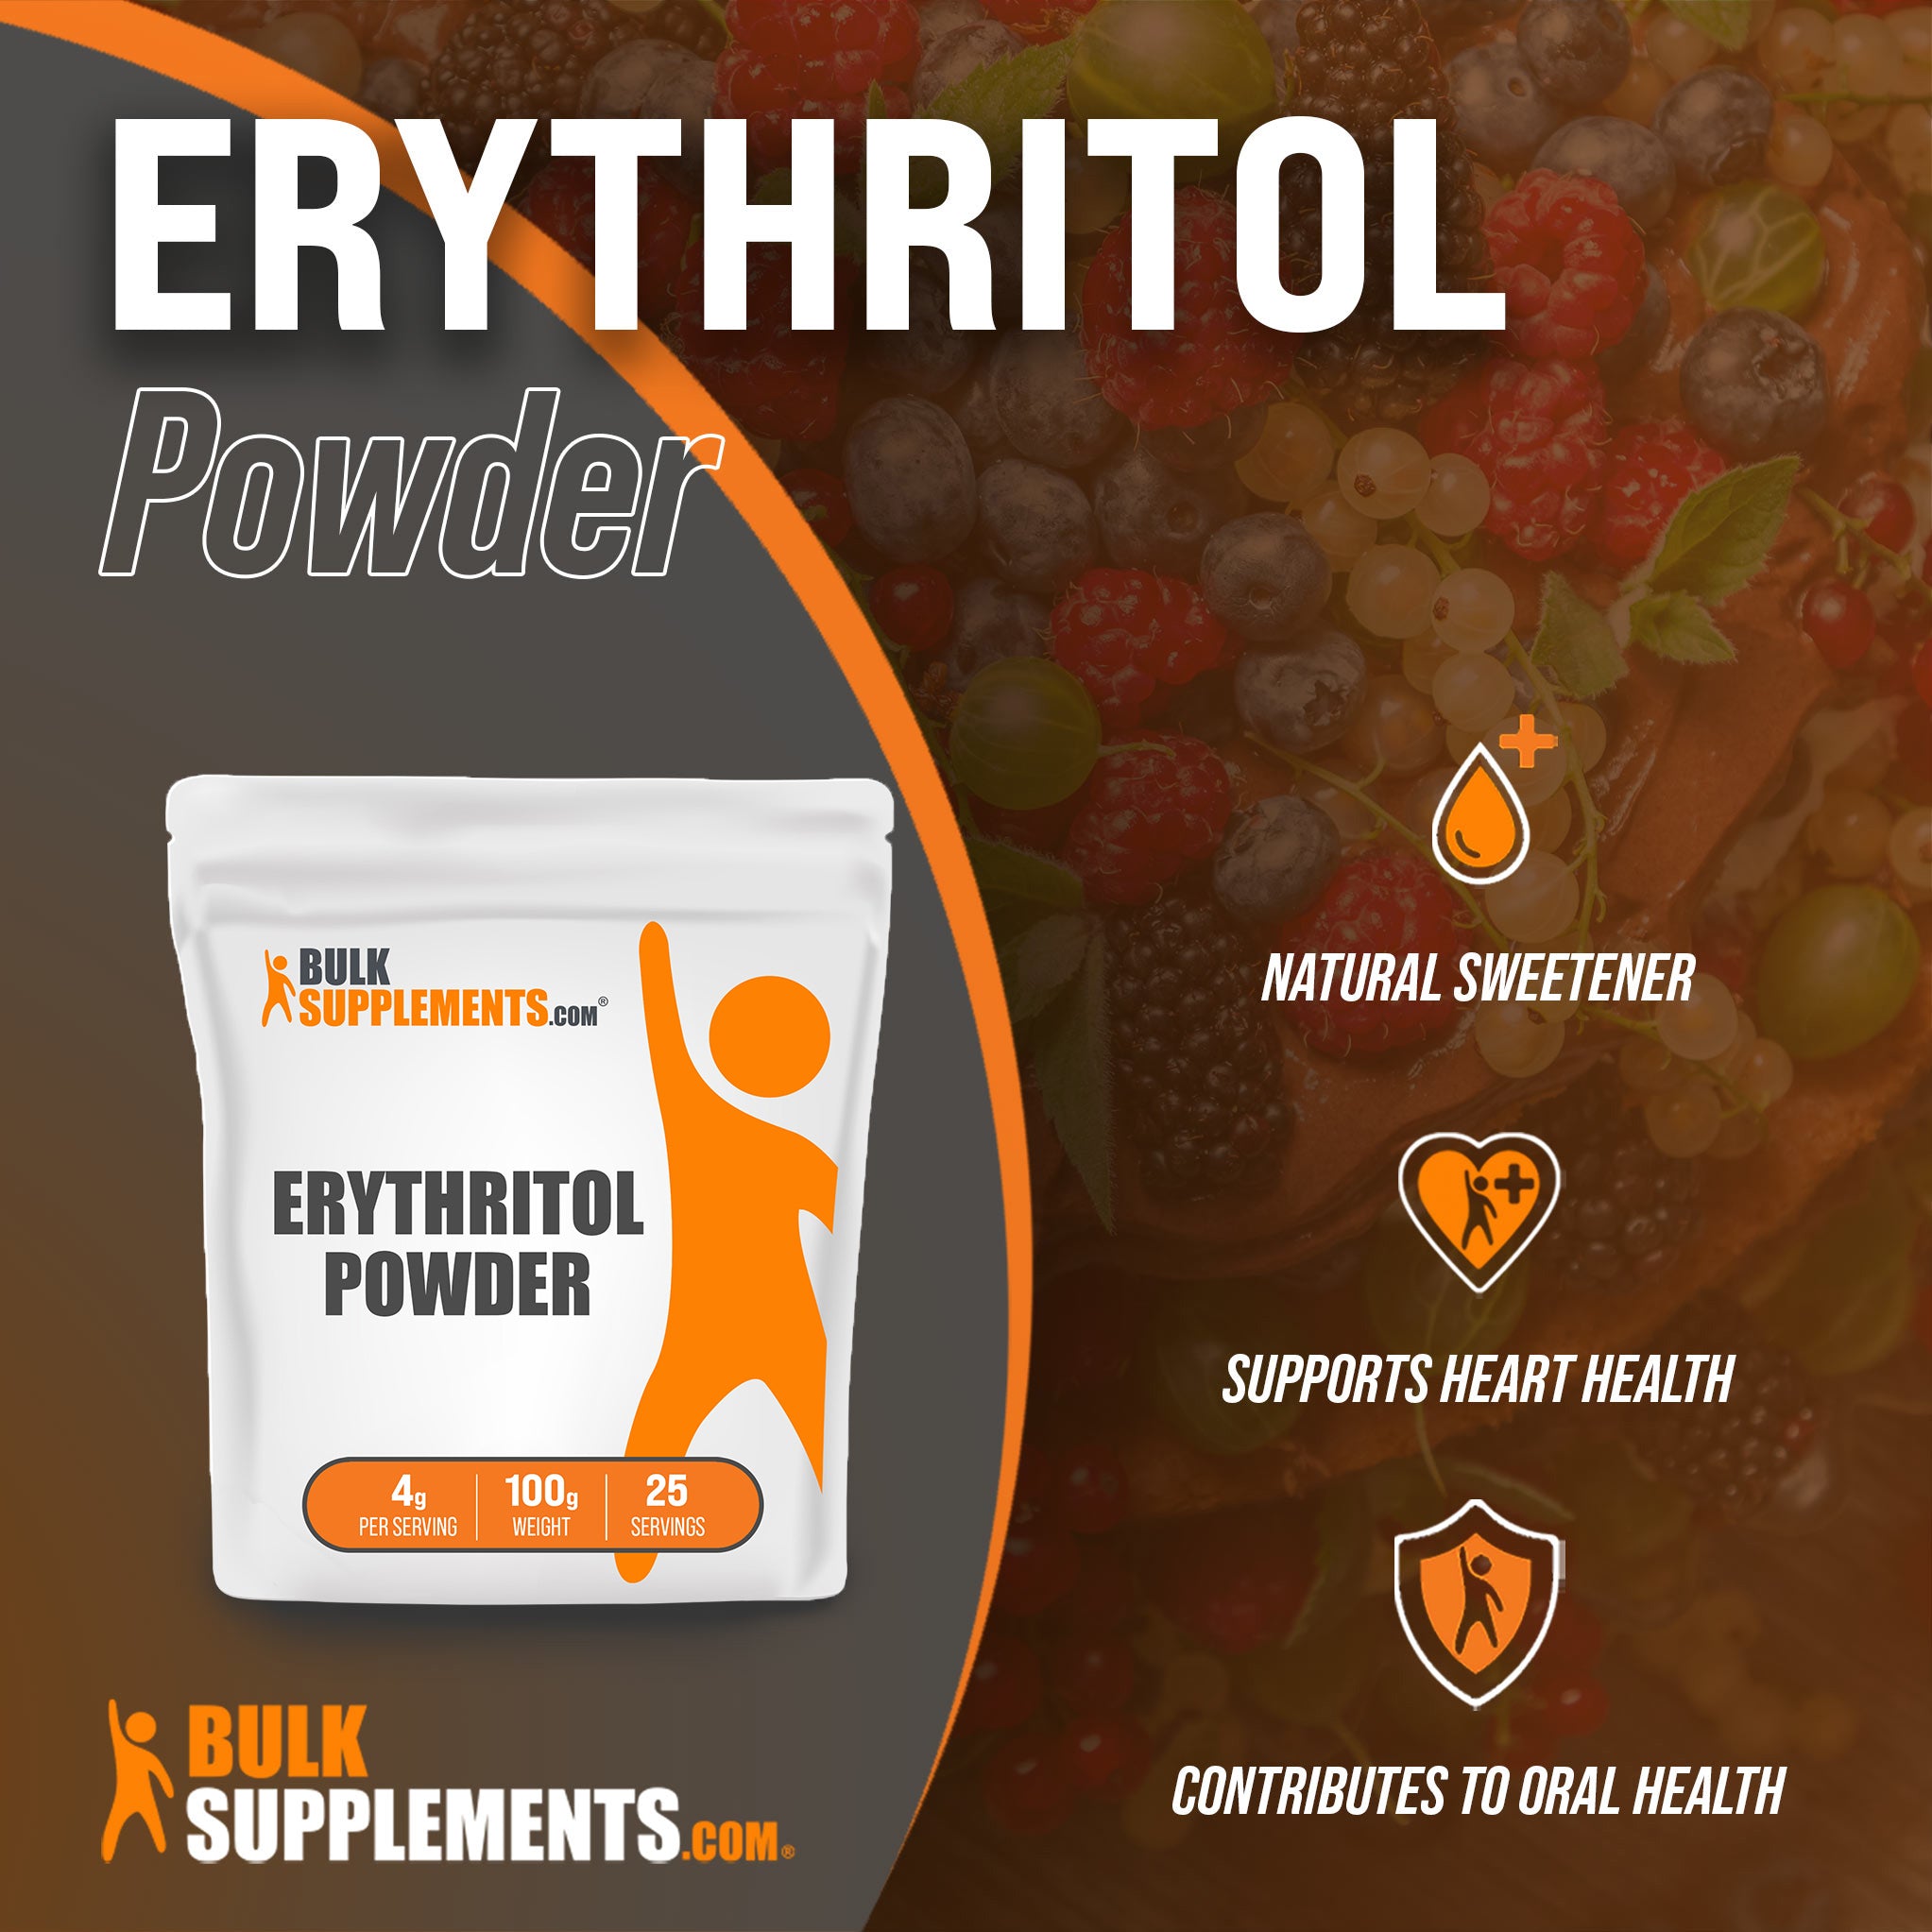 Benefits of Erythritol; natural sweetener, supports heart health, contributes to oral health